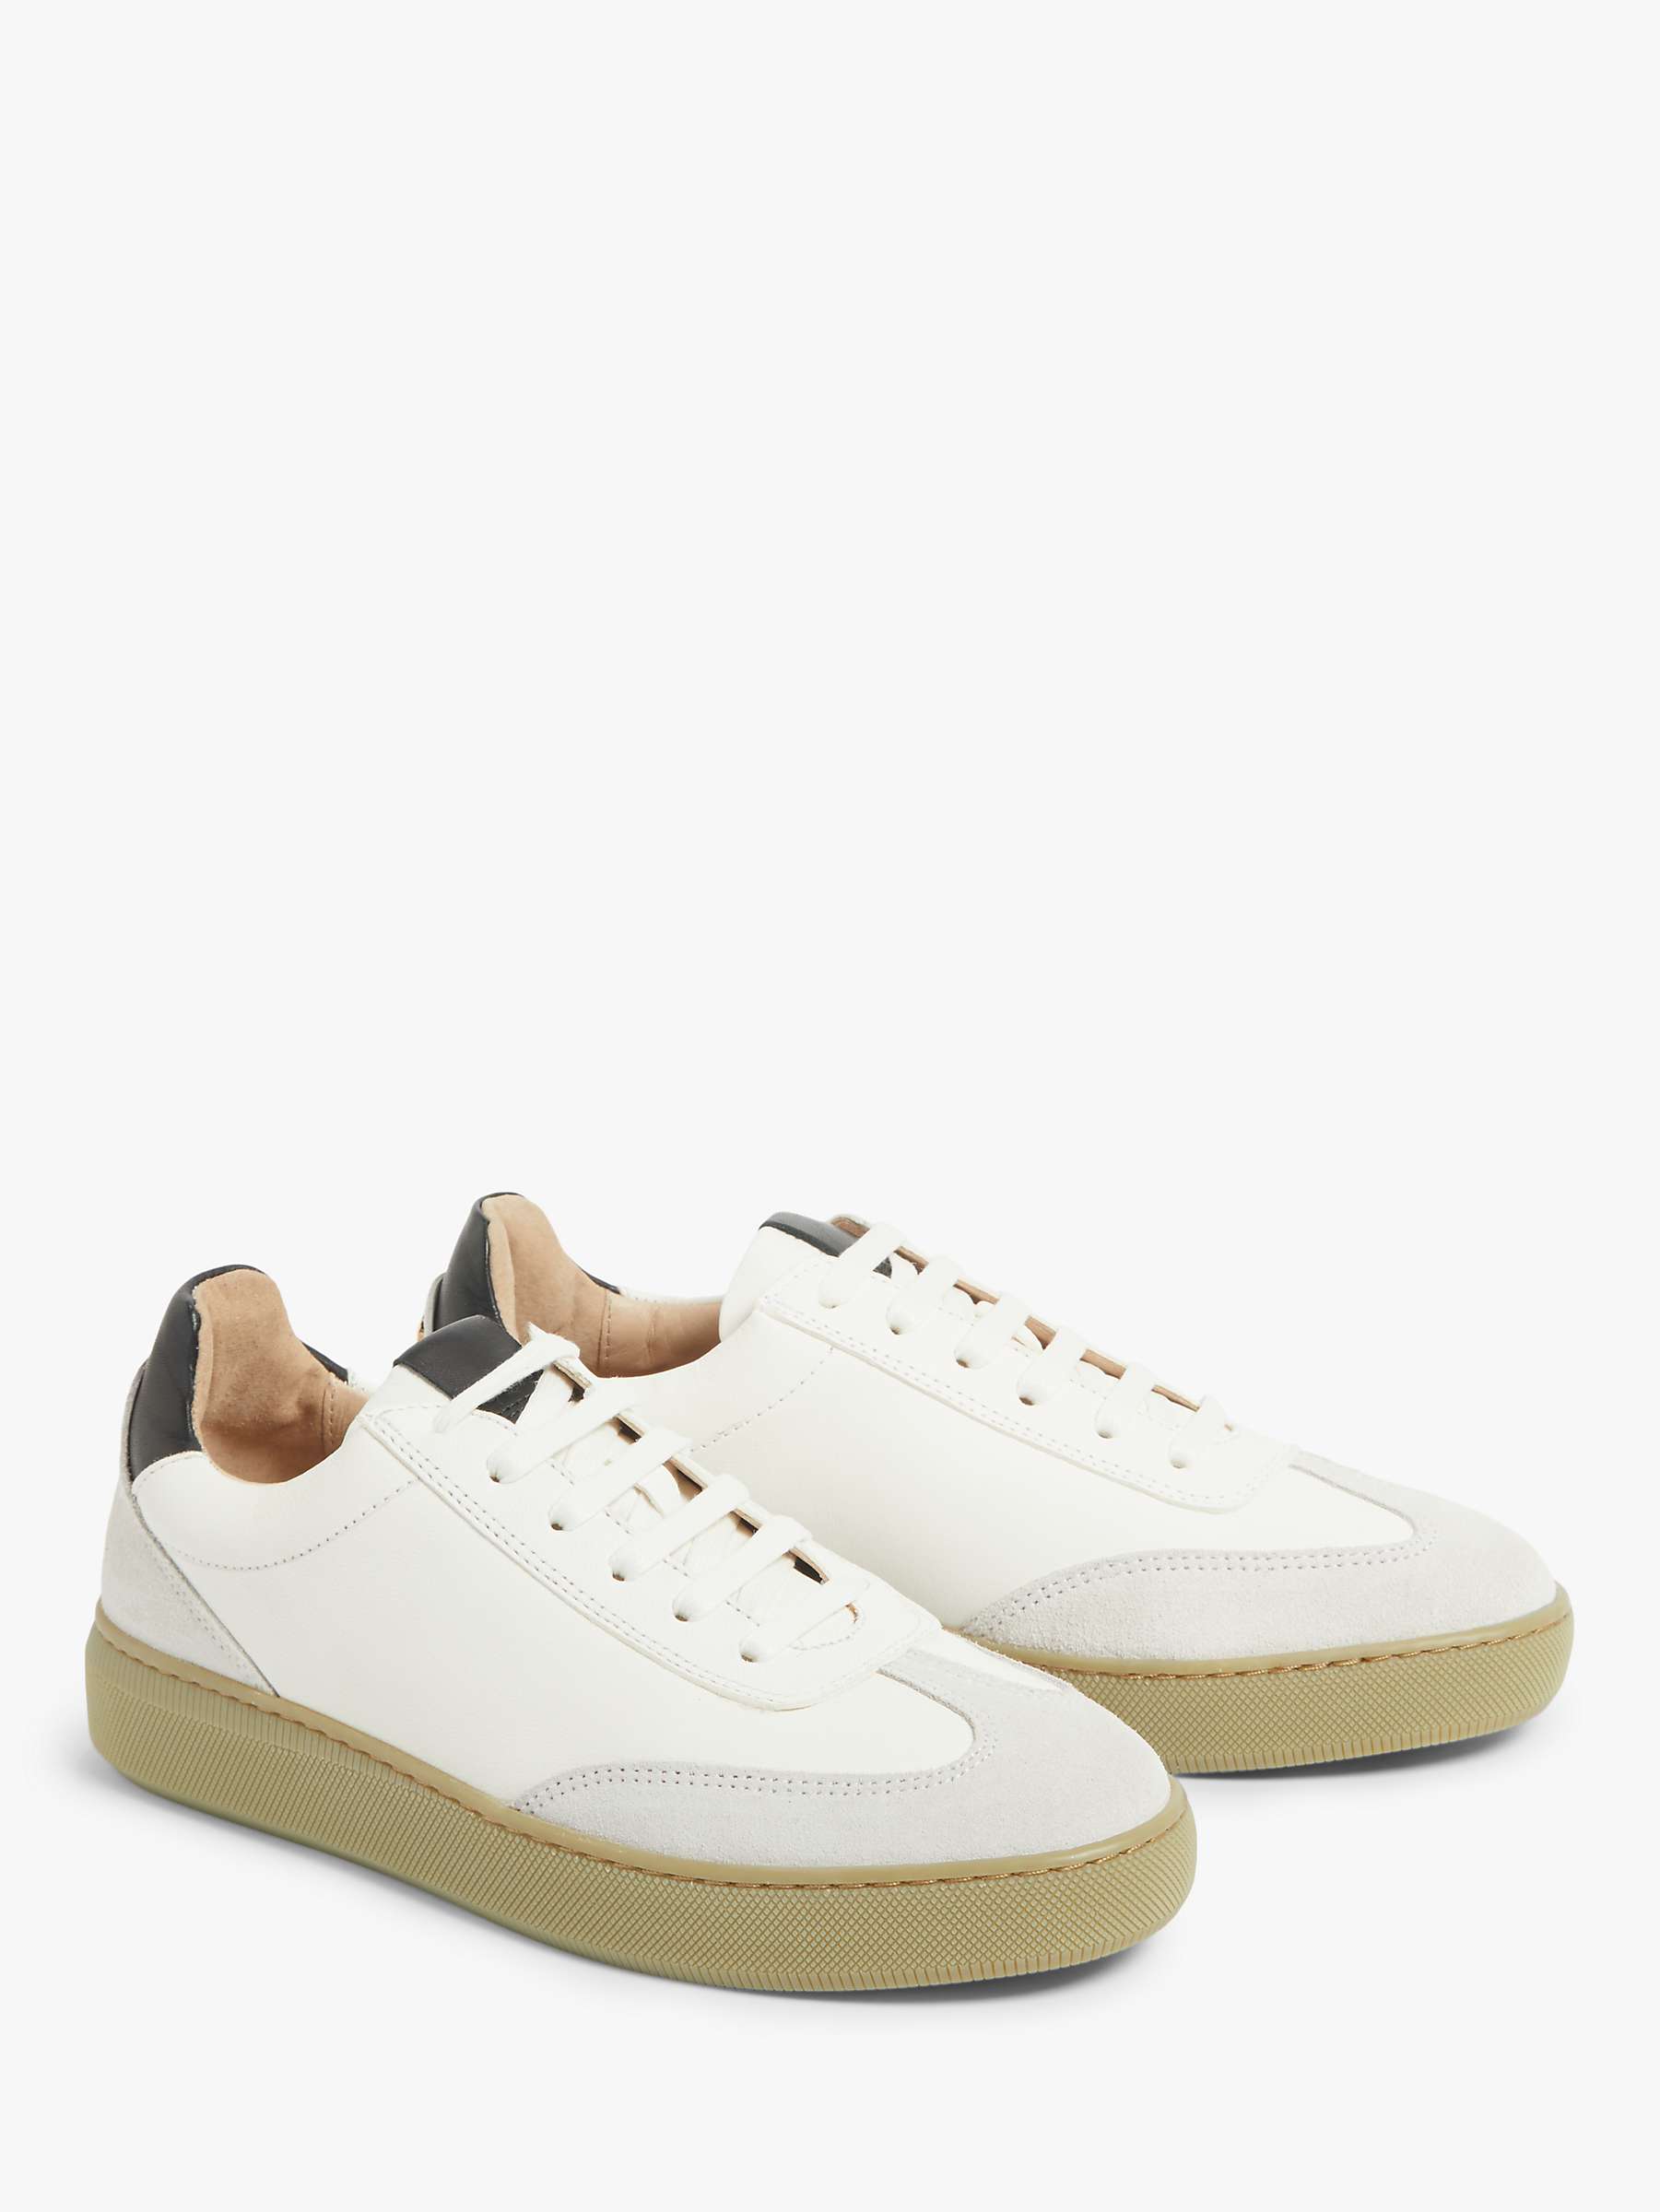 Buy John Lewis Fern Leather Trainers, White Online at johnlewis.com